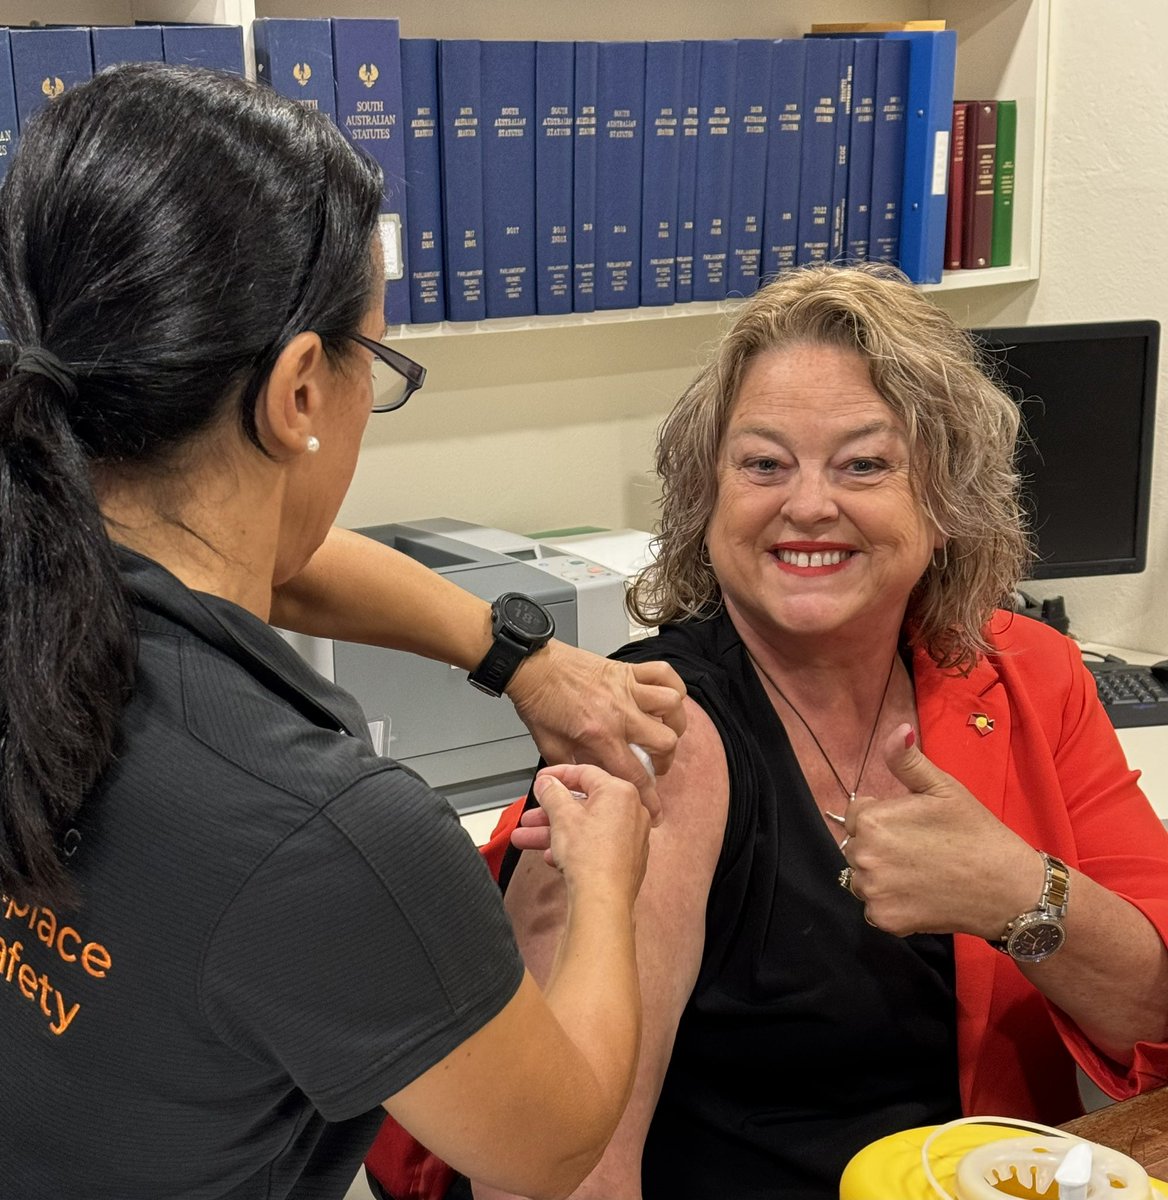 Have you had your Flu shot yet? 🤧💉 Vaccinations protect you, your family and vulnerable community members. Help to save lives this Flu season.